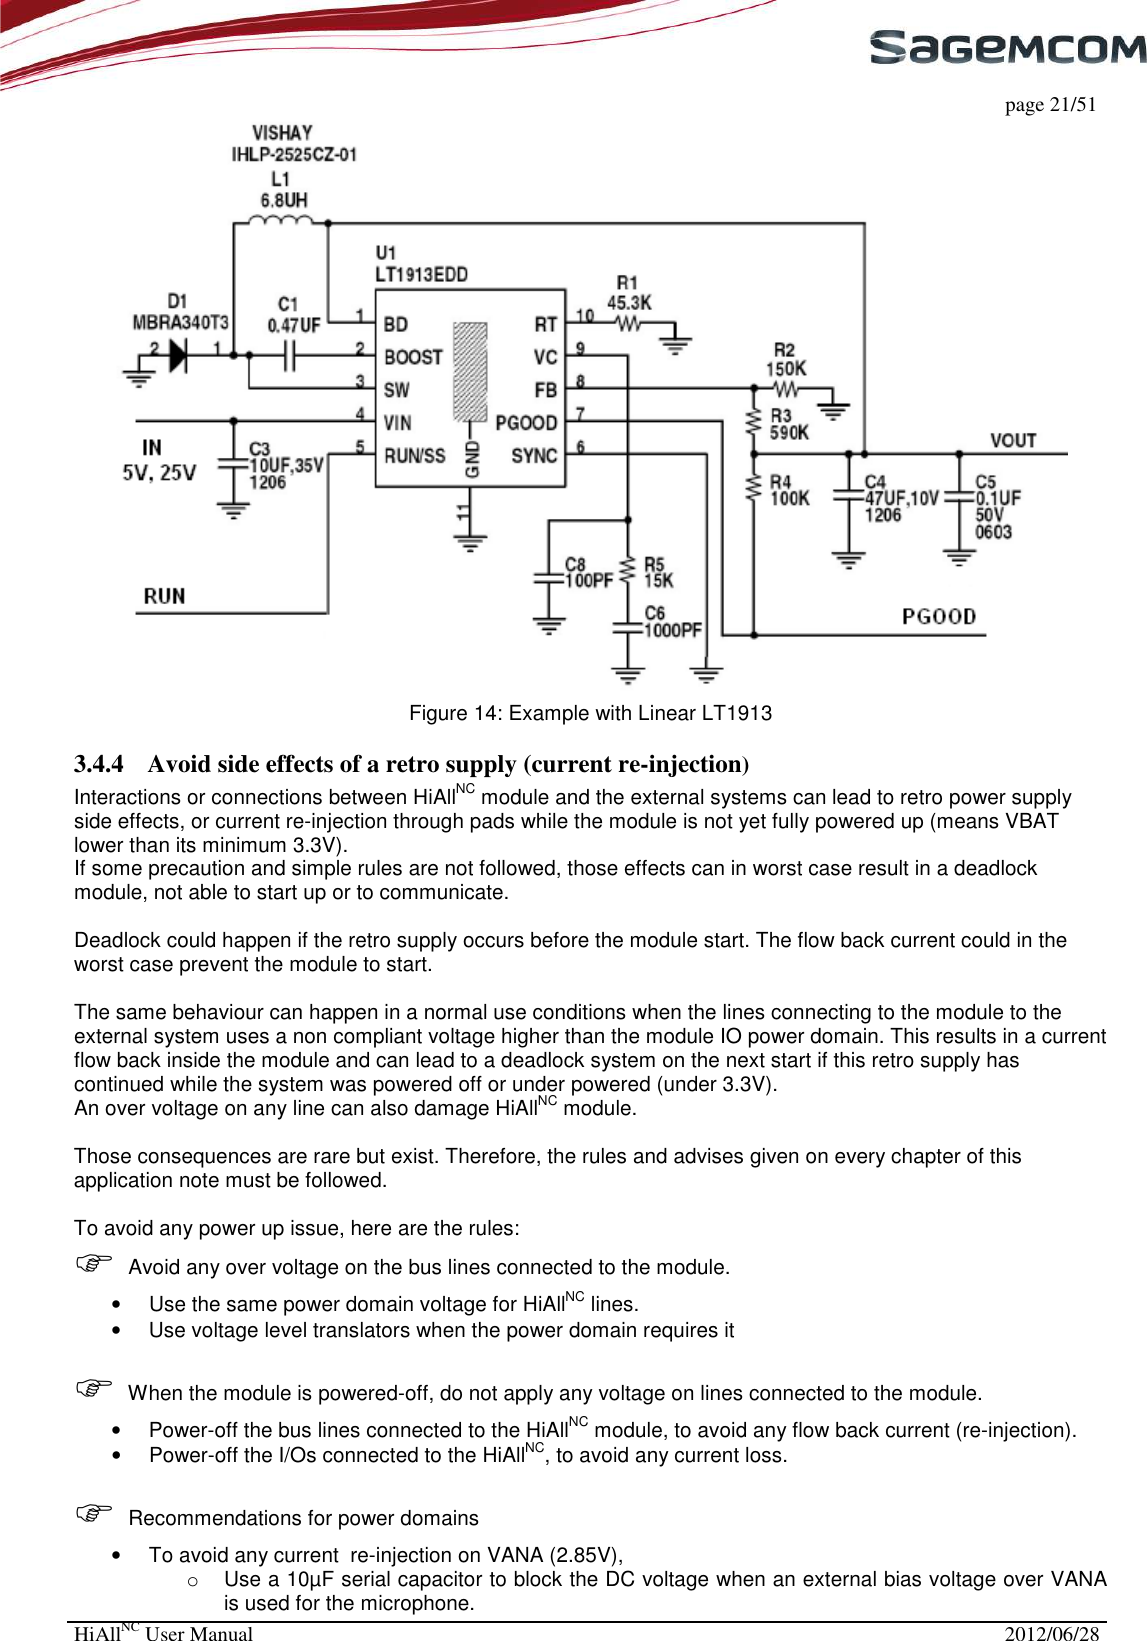     page 21/51 HiAllNC User Manual  2012/06/28   Figure 14: Example with Linear LT1913 3.4.4 Avoid side effects of a retro supply (current re-injection) Interactions or connections between HiAllNC module and the external systems can lead to retro power supply side effects, or current re-injection through pads while the module is not yet fully powered up (means VBAT lower than its minimum 3.3V).  If some precaution and simple rules are not followed, those effects can in worst case result in a deadlock module, not able to start up or to communicate.  Deadlock could happen if the retro supply occurs before the module start. The flow back current could in the worst case prevent the module to start.  The same behaviour can happen in a normal use conditions when the lines connecting to the module to the external system uses a non compliant voltage higher than the module IO power domain. This results in a current flow back inside the module and can lead to a deadlock system on the next start if this retro supply has continued while the system was powered off or under powered (under 3.3V).  An over voltage on any line can also damage HiAllNC module.  Those consequences are rare but exist. Therefore, the rules and advises given on every chapter of this application note must be followed.  To avoid any power up issue, here are the rules:  Avoid any over voltage on the bus lines connected to the module. •  Use the same power domain voltage for HiAllNC lines. •  Use voltage level translators when the power domain requires it   When the module is powered-off, do not apply any voltage on lines connected to the module. •  Power-off the bus lines connected to the HiAllNC module, to avoid any flow back current (re-injection).  •  Power-off the I/Os connected to the HiAllNC, to avoid any current loss.   Recommendations for power domains •  To avoid any current  re-injection on VANA (2.85V),  o  Use a 10µF serial capacitor to block the DC voltage when an external bias voltage over VANA is used for the microphone. 